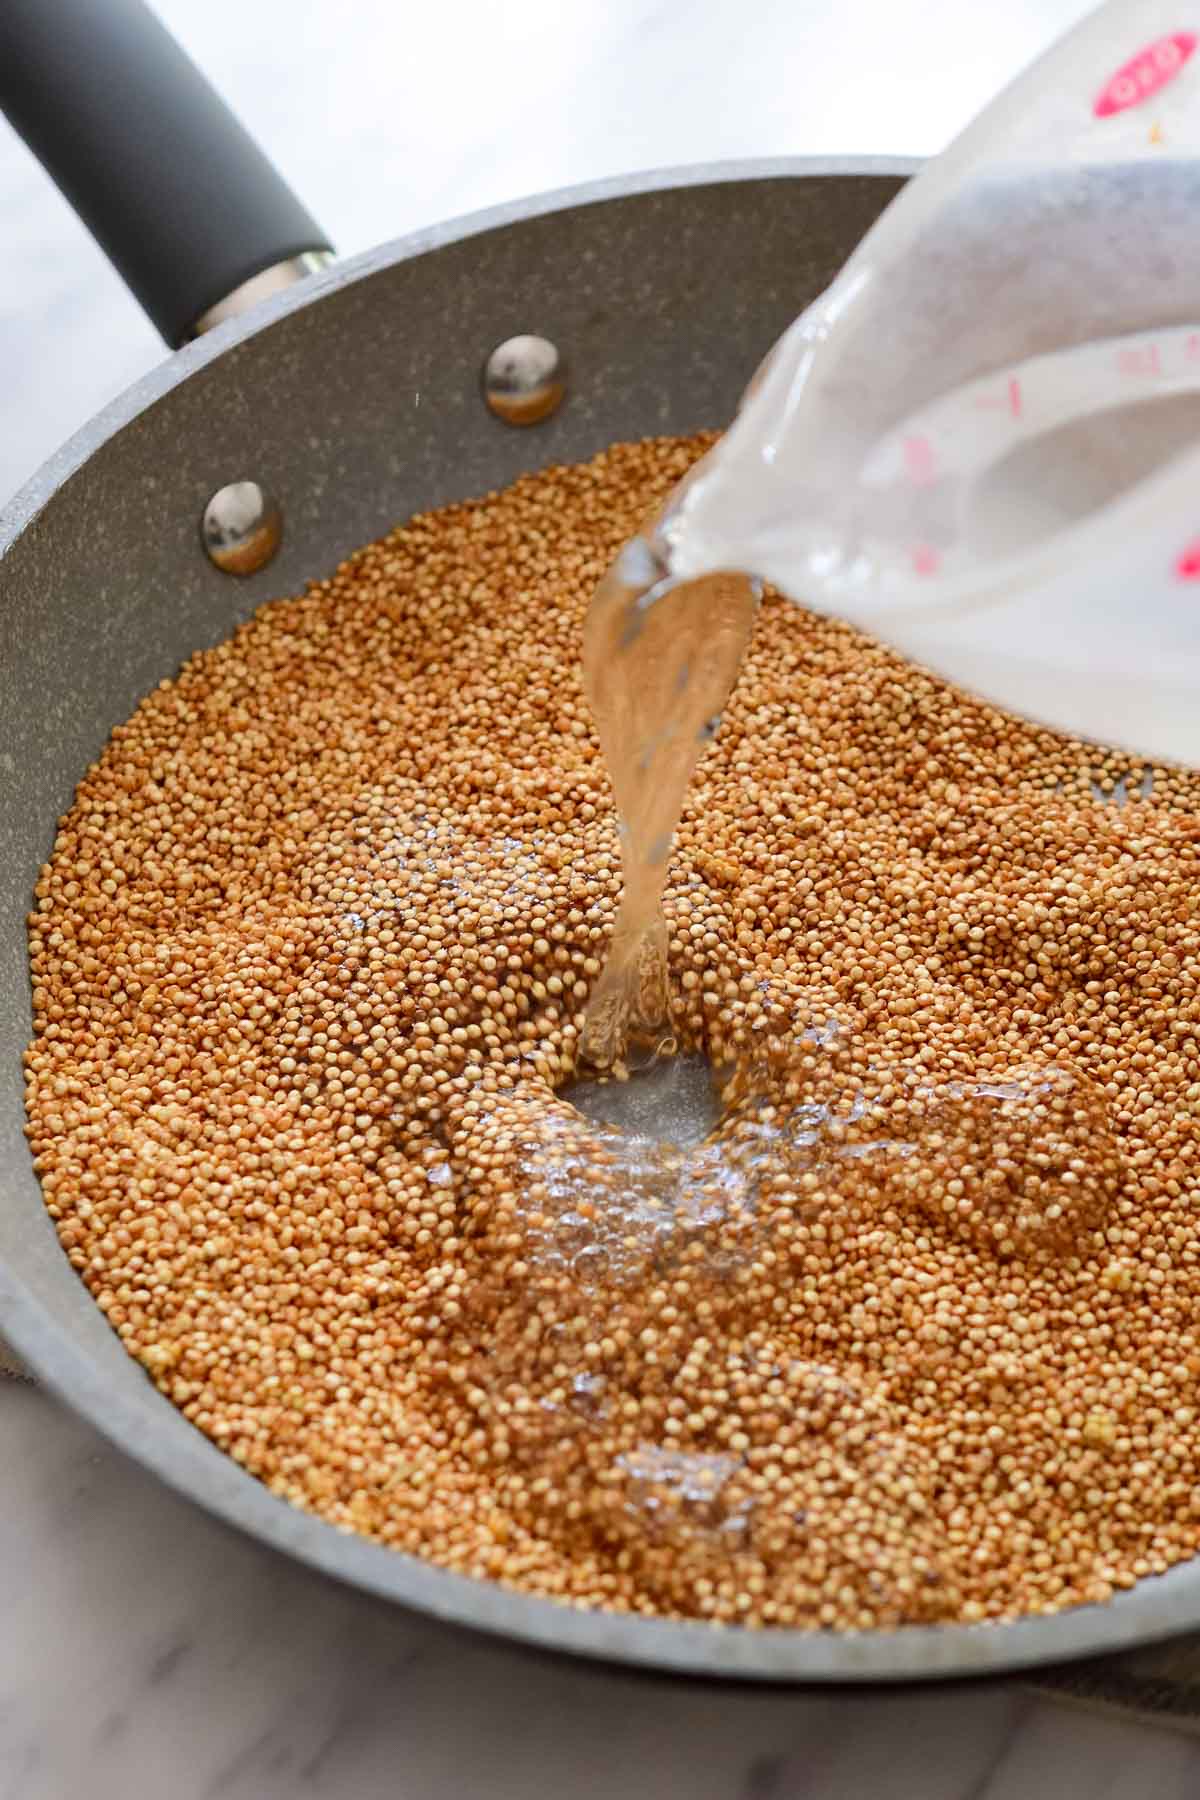 Pouring water into the grey pan of toasted quinoa.